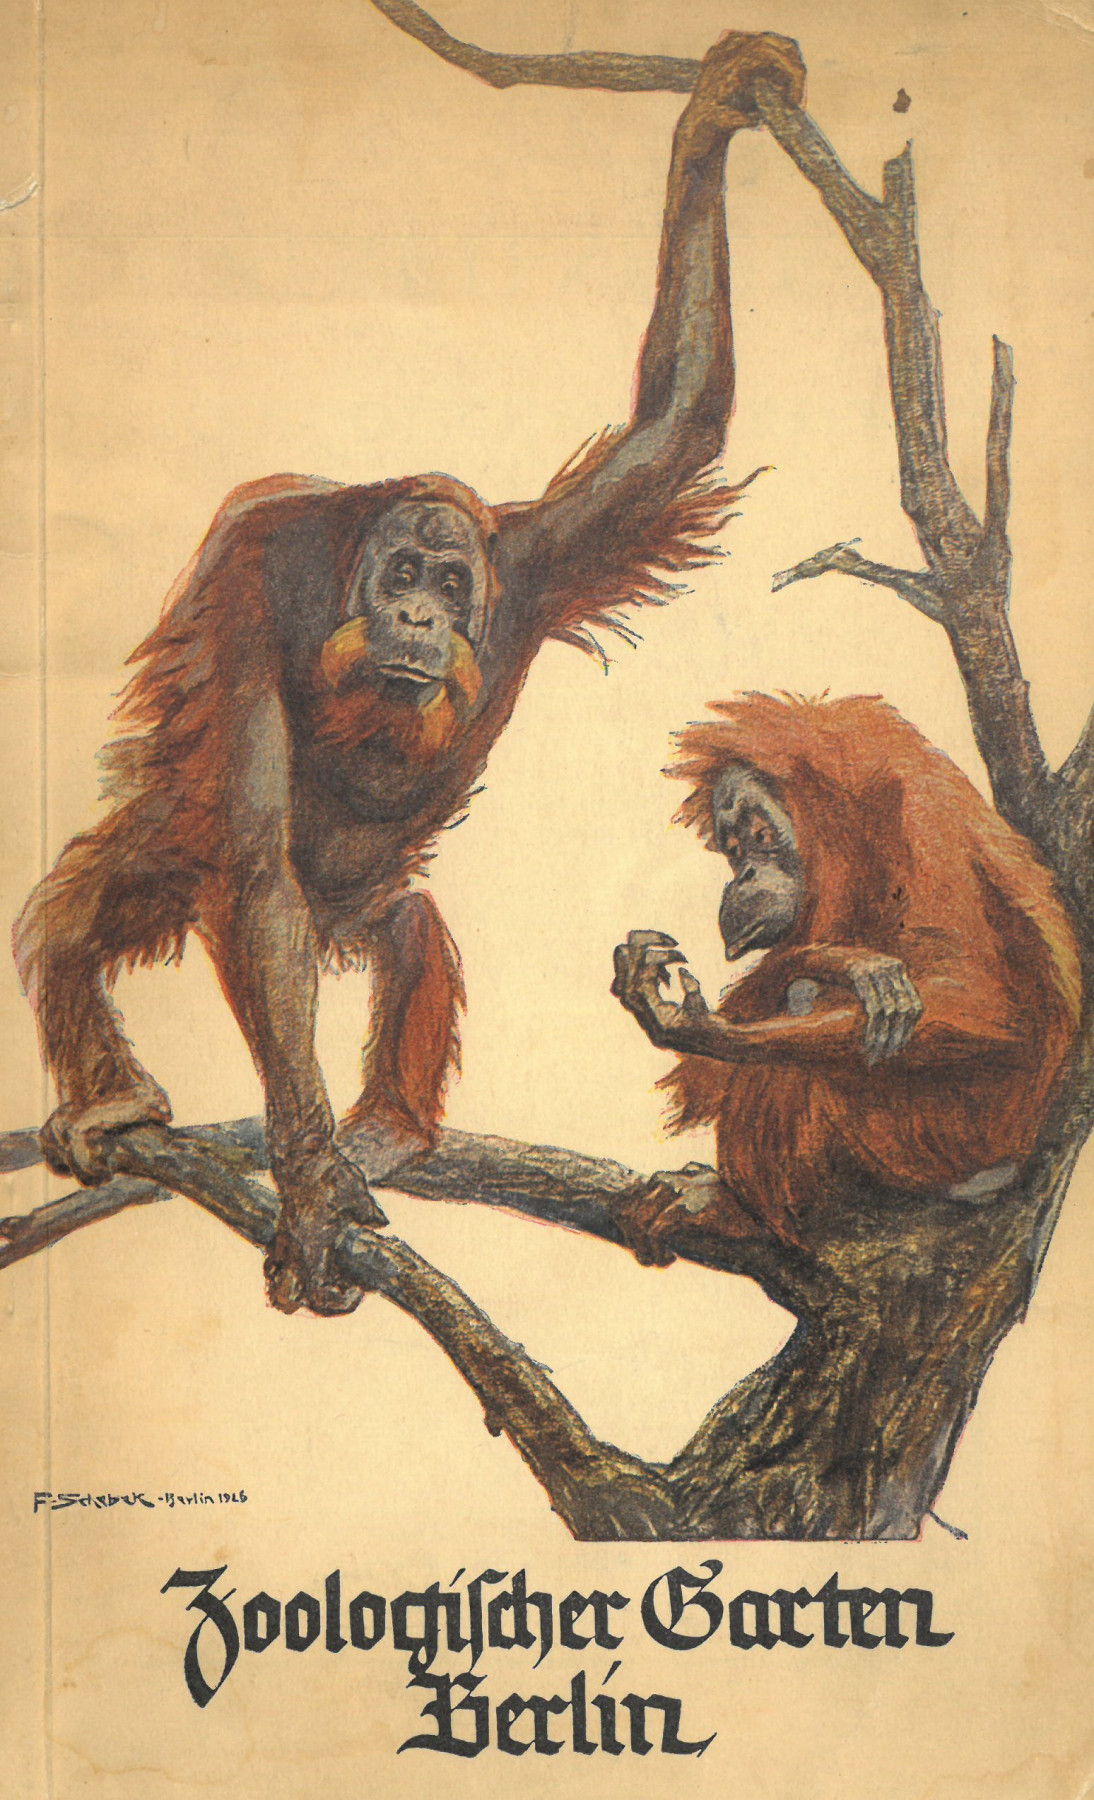 Cover picture of the signpost through the Zoological Garden Berlin 1927 with two red-haired apes sitting on a branch.